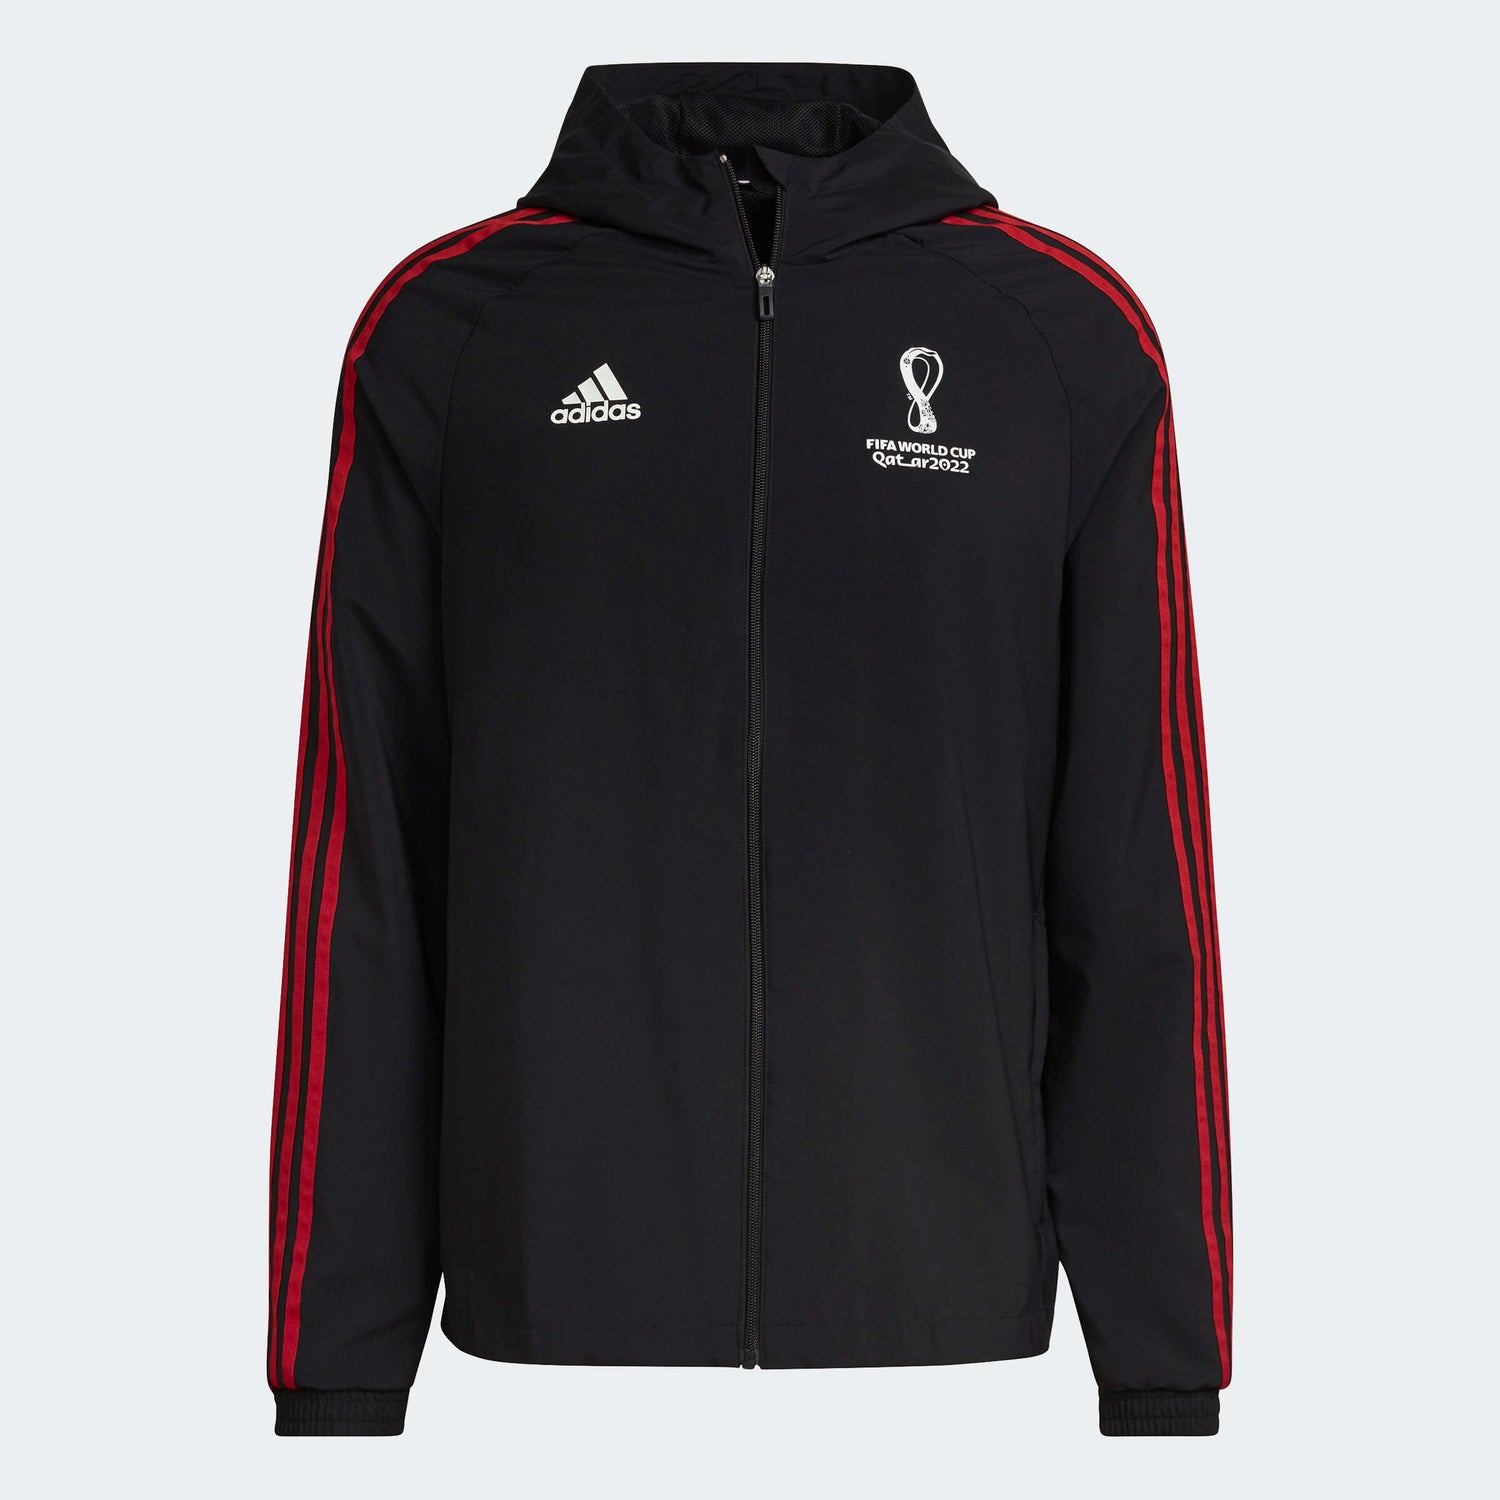 adidas 2022 FIFA World Cup Woven Jacket - Black (Front)